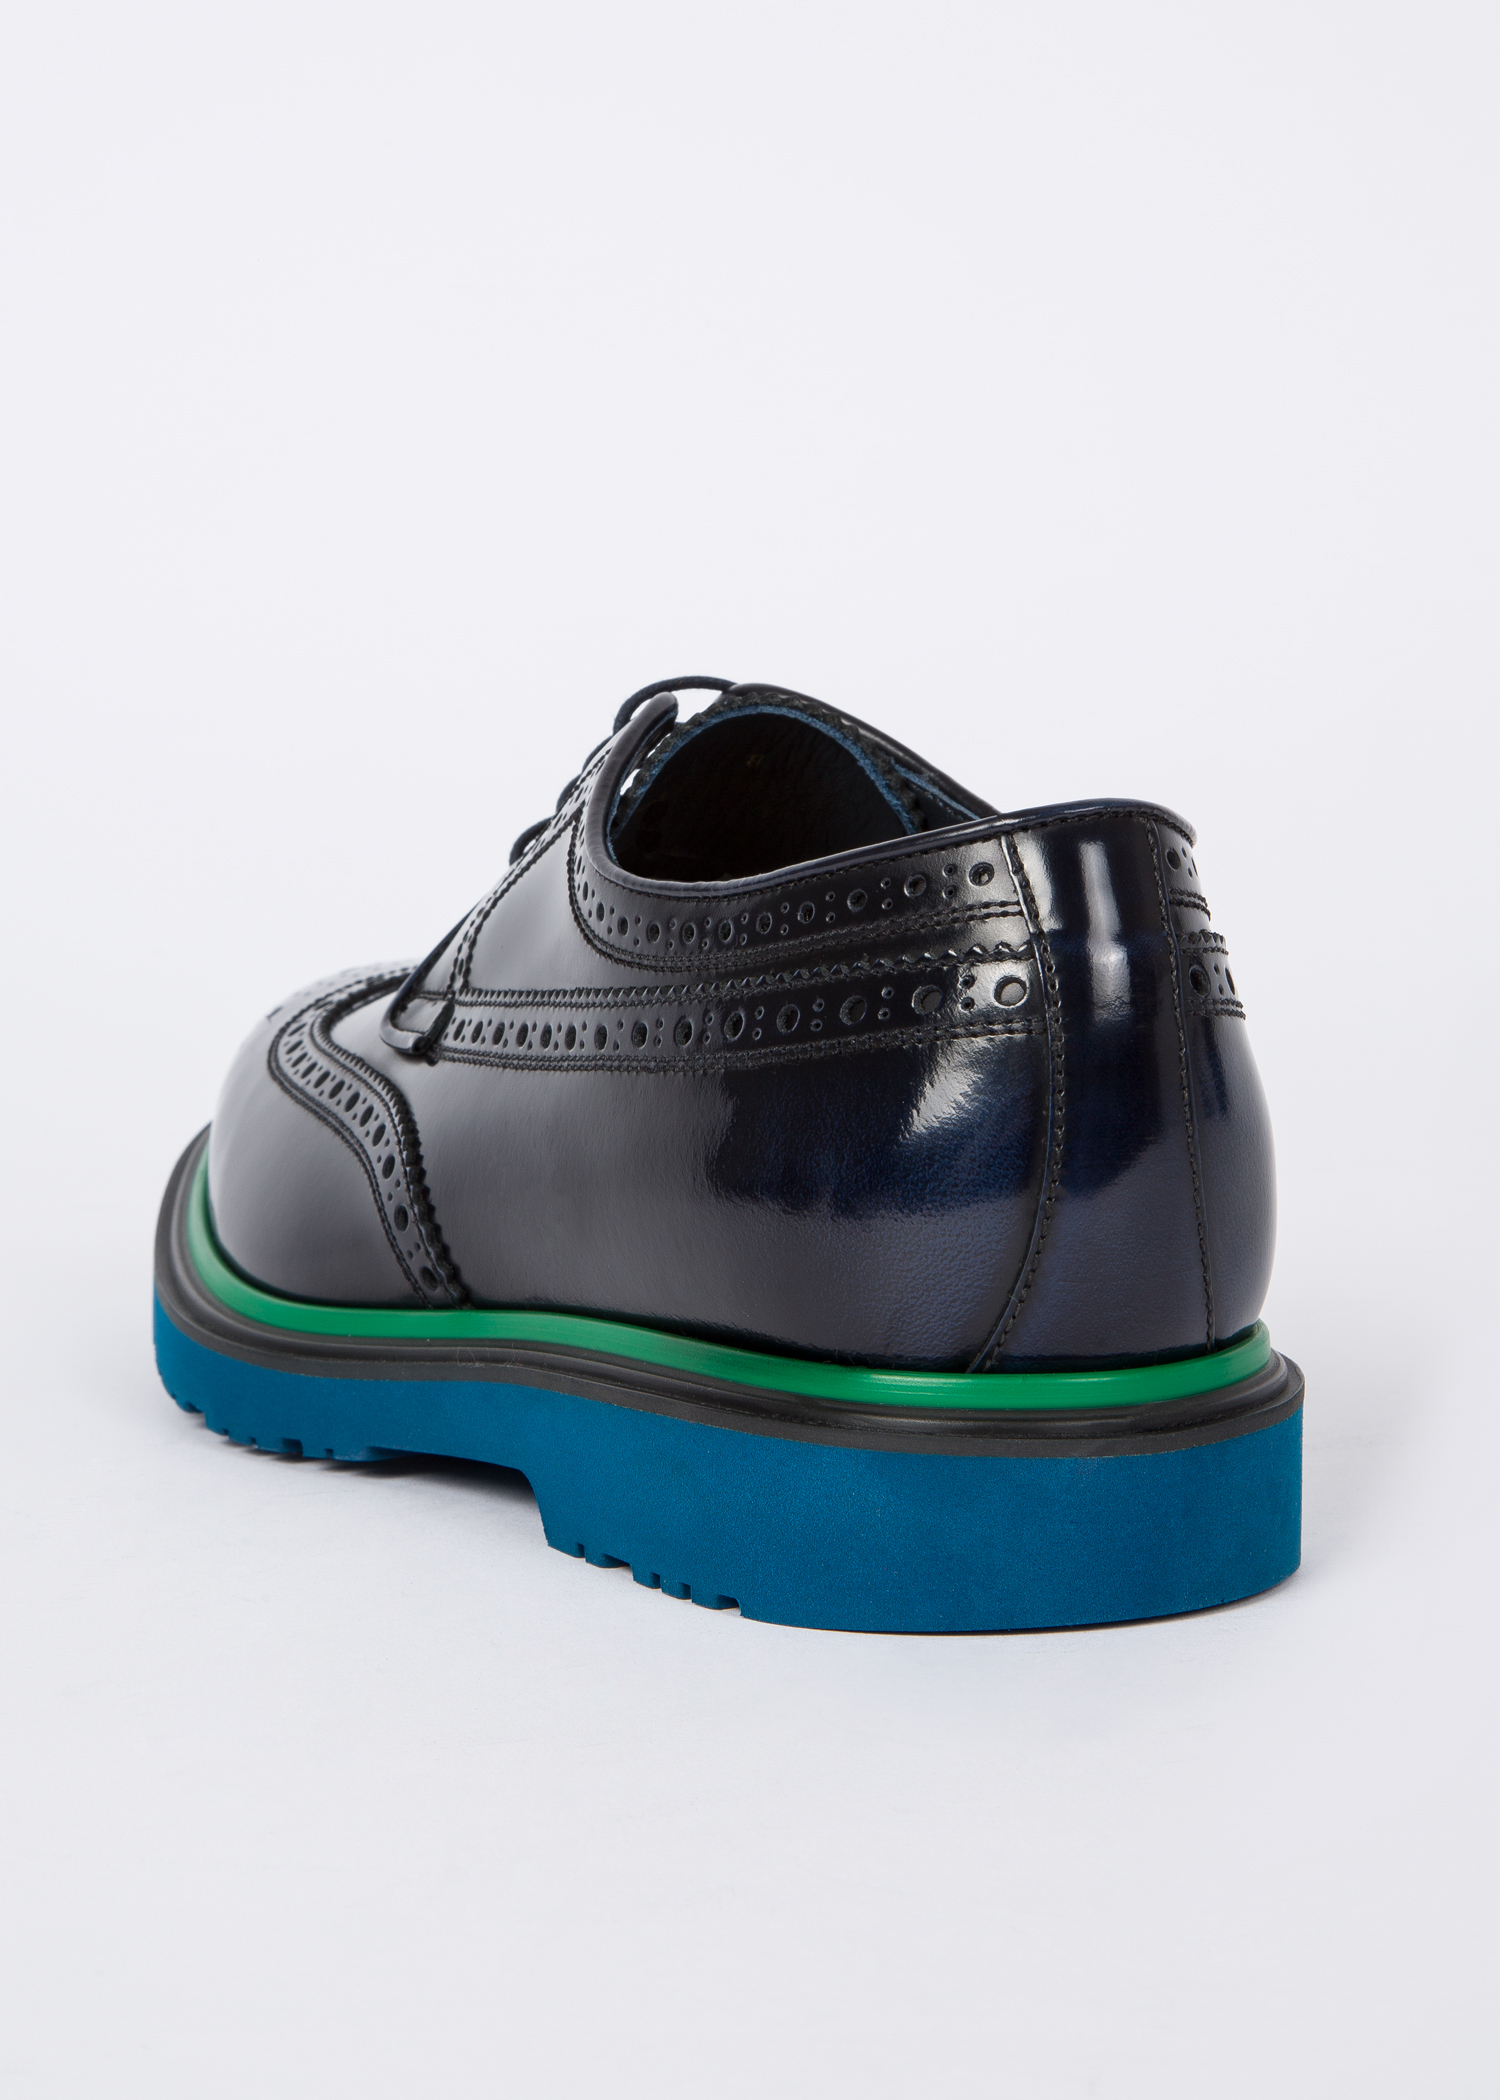 Men's Dark Navy Leather 'Crispin' Brogues With Petrol Soles - Paul Smith US